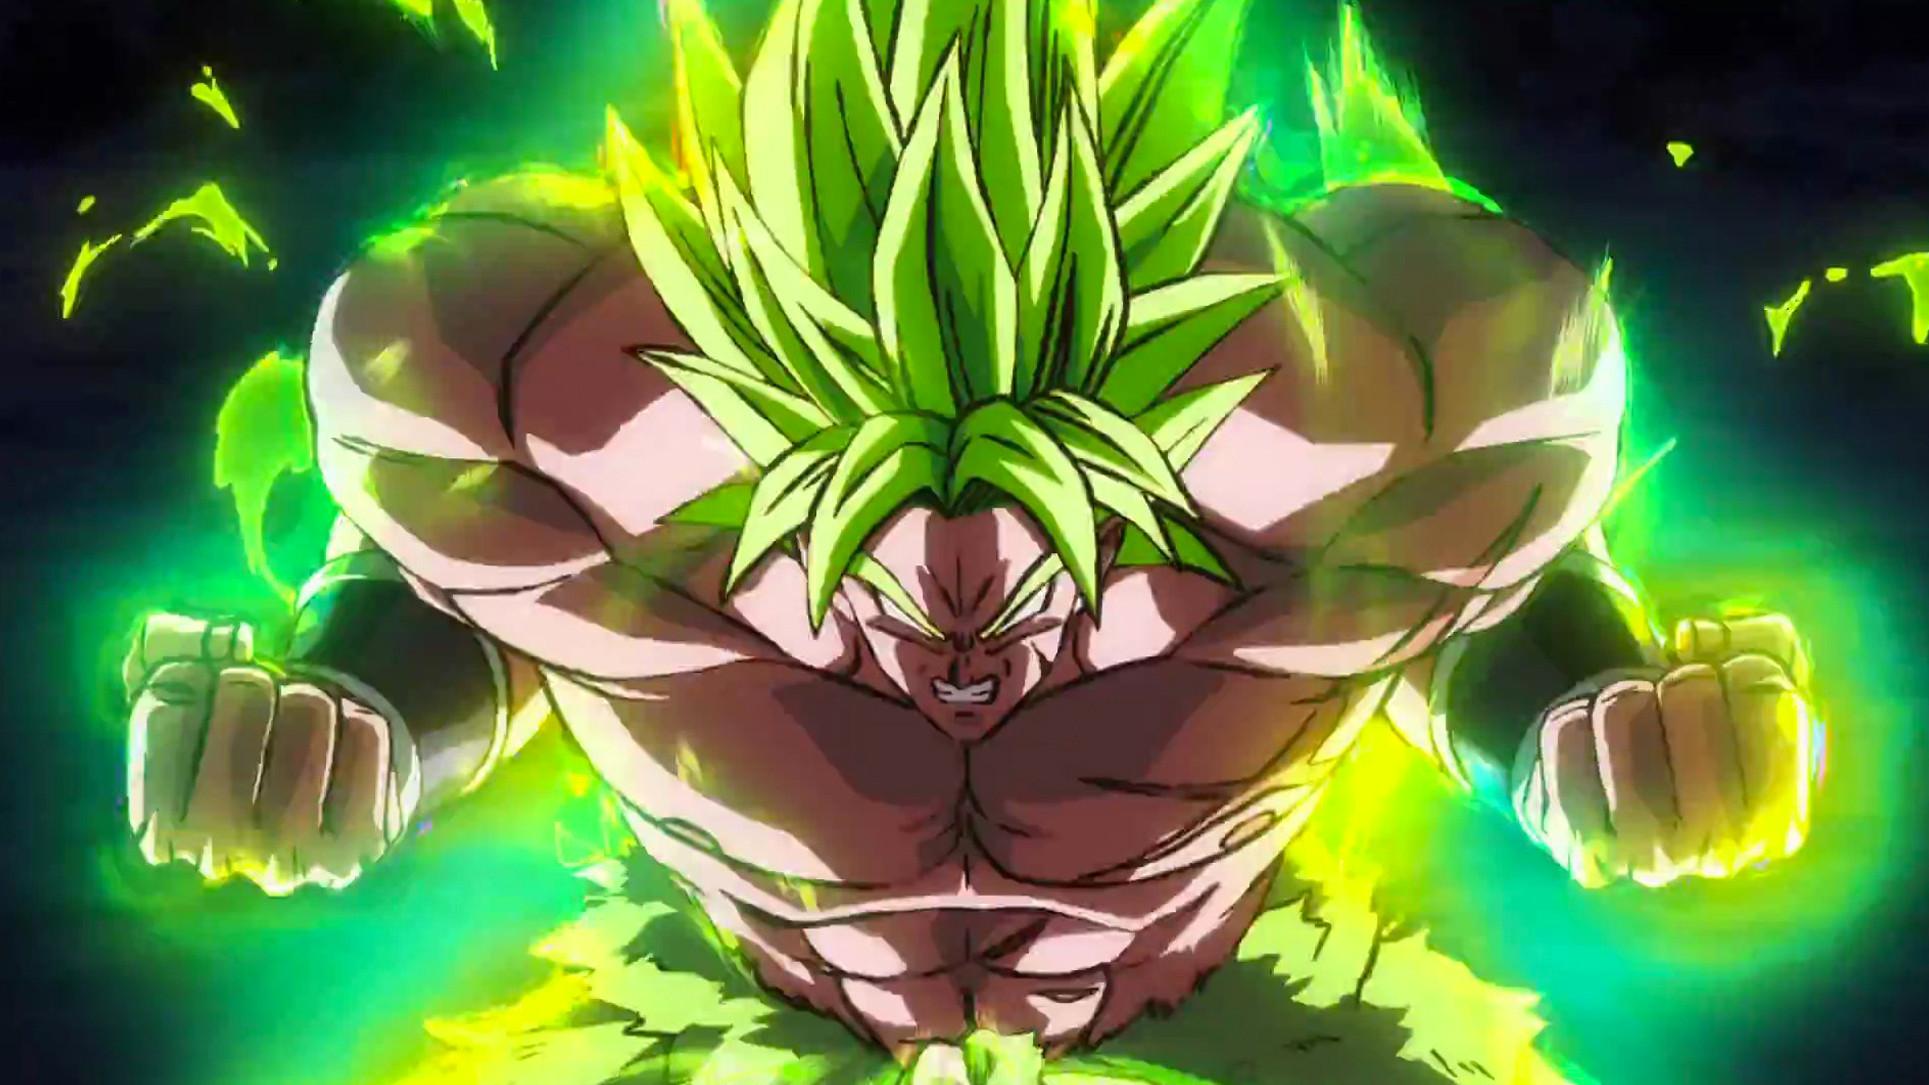 Broly Wallpapers - Top Free Broly Backgrounds ...